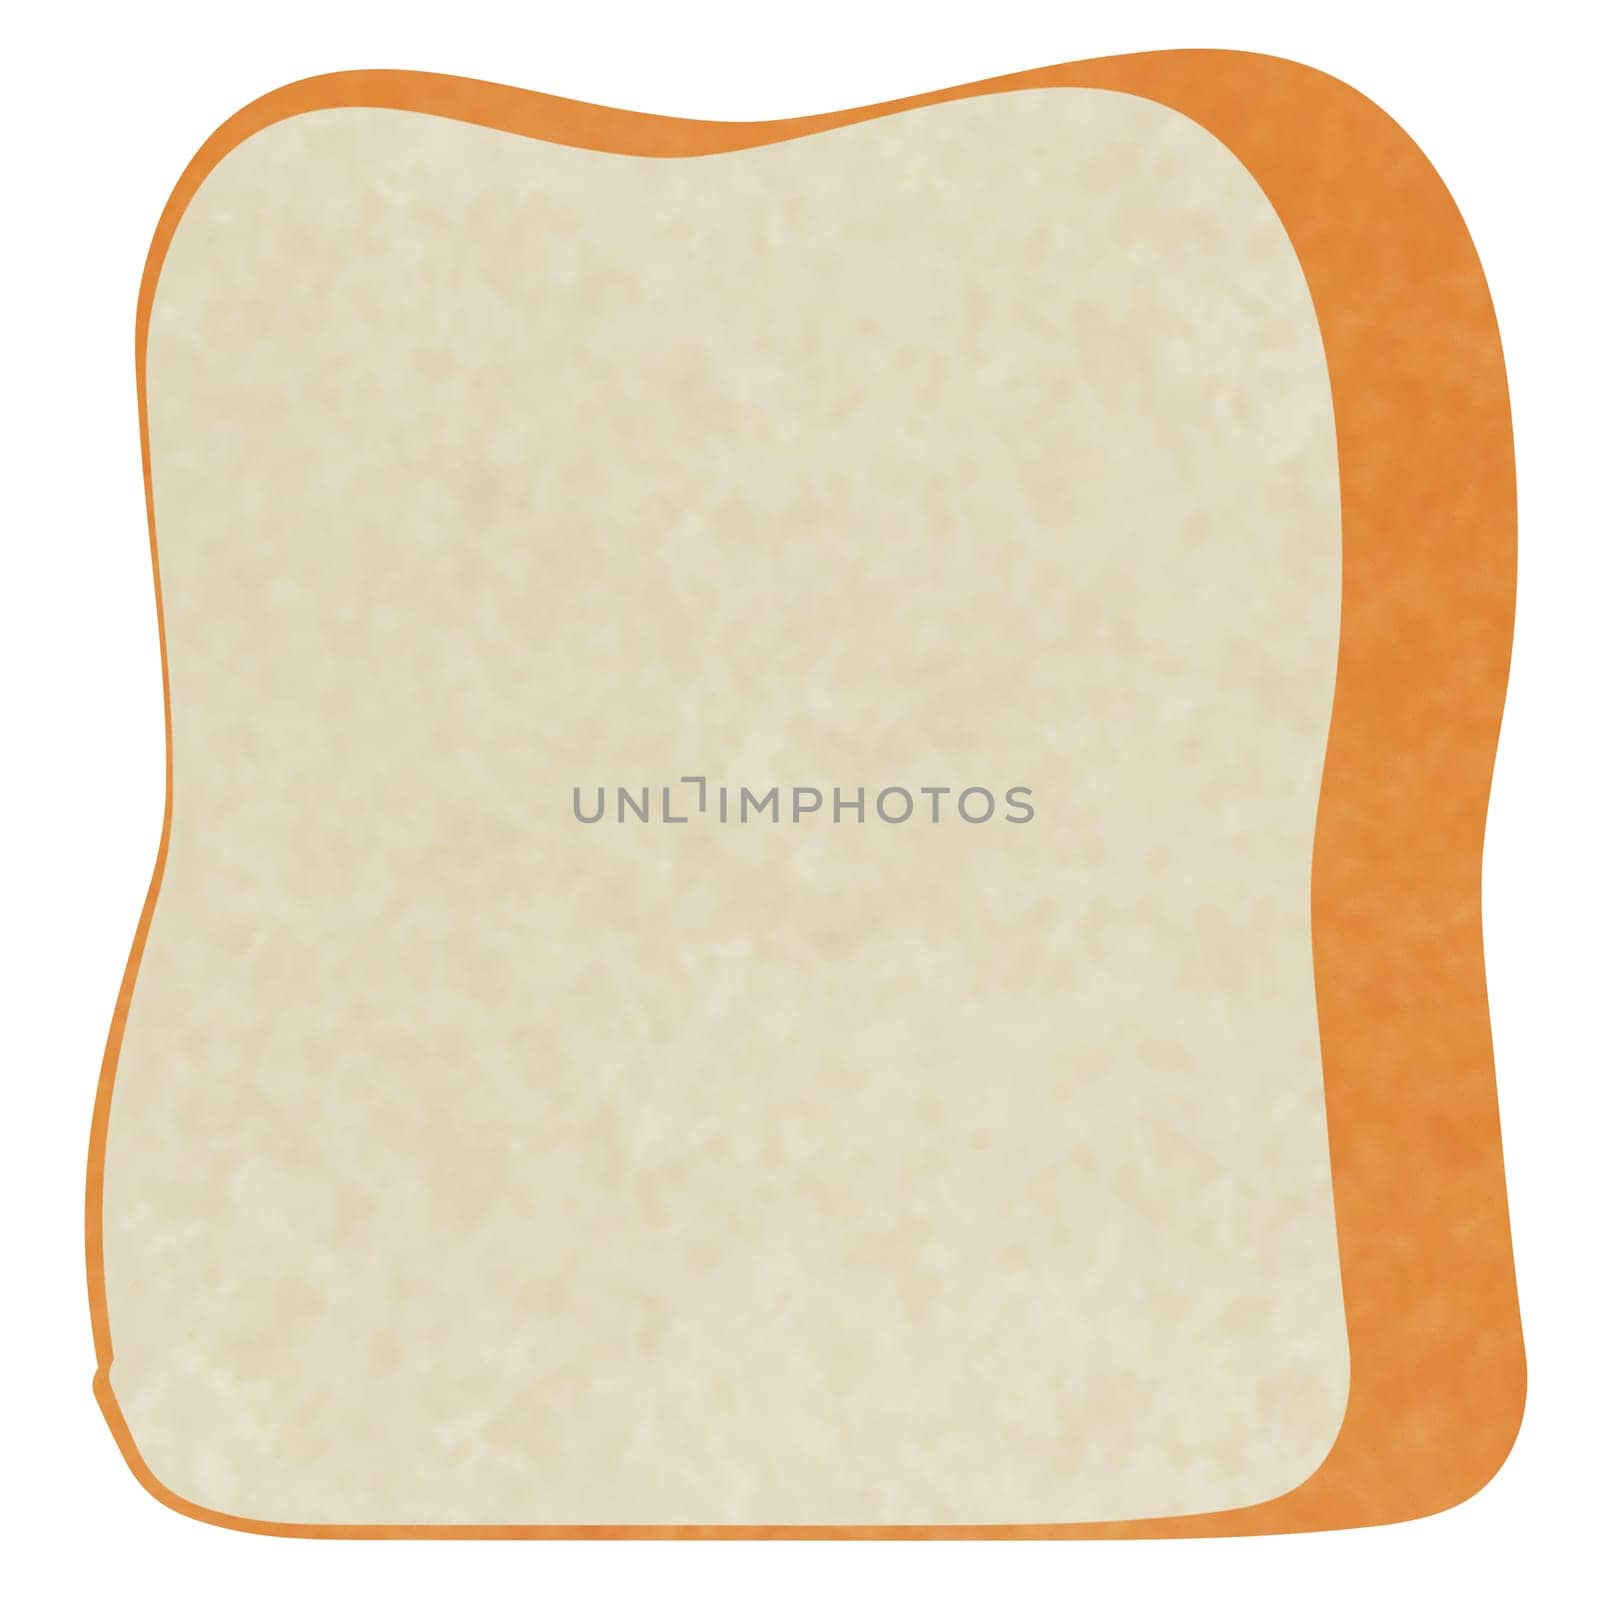 Drawing of bread isolated on white background for usage as an illustration, food, snacks, bakery and eating concept